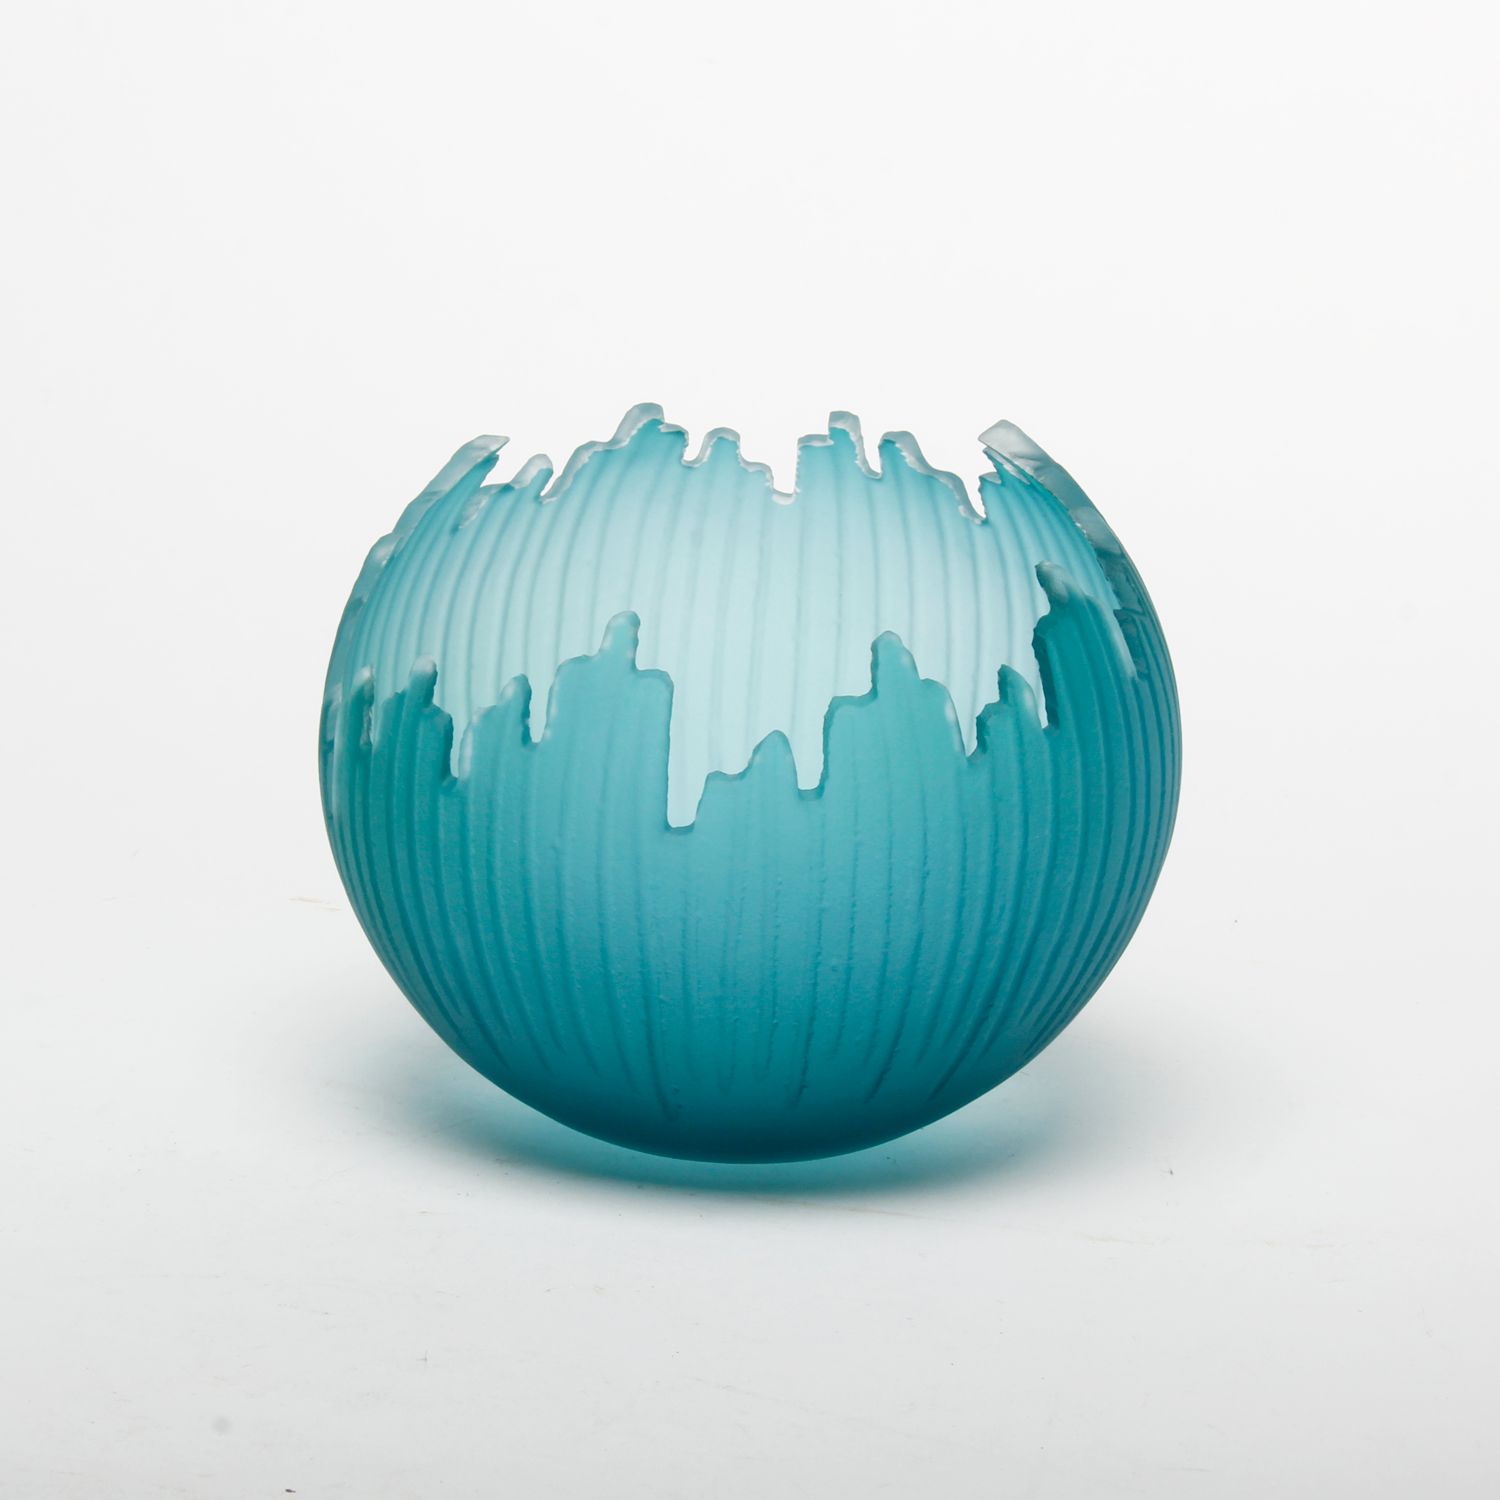 Courtney Downman: Lagoon Green Saw Carved Orb Product Image 1 of 3